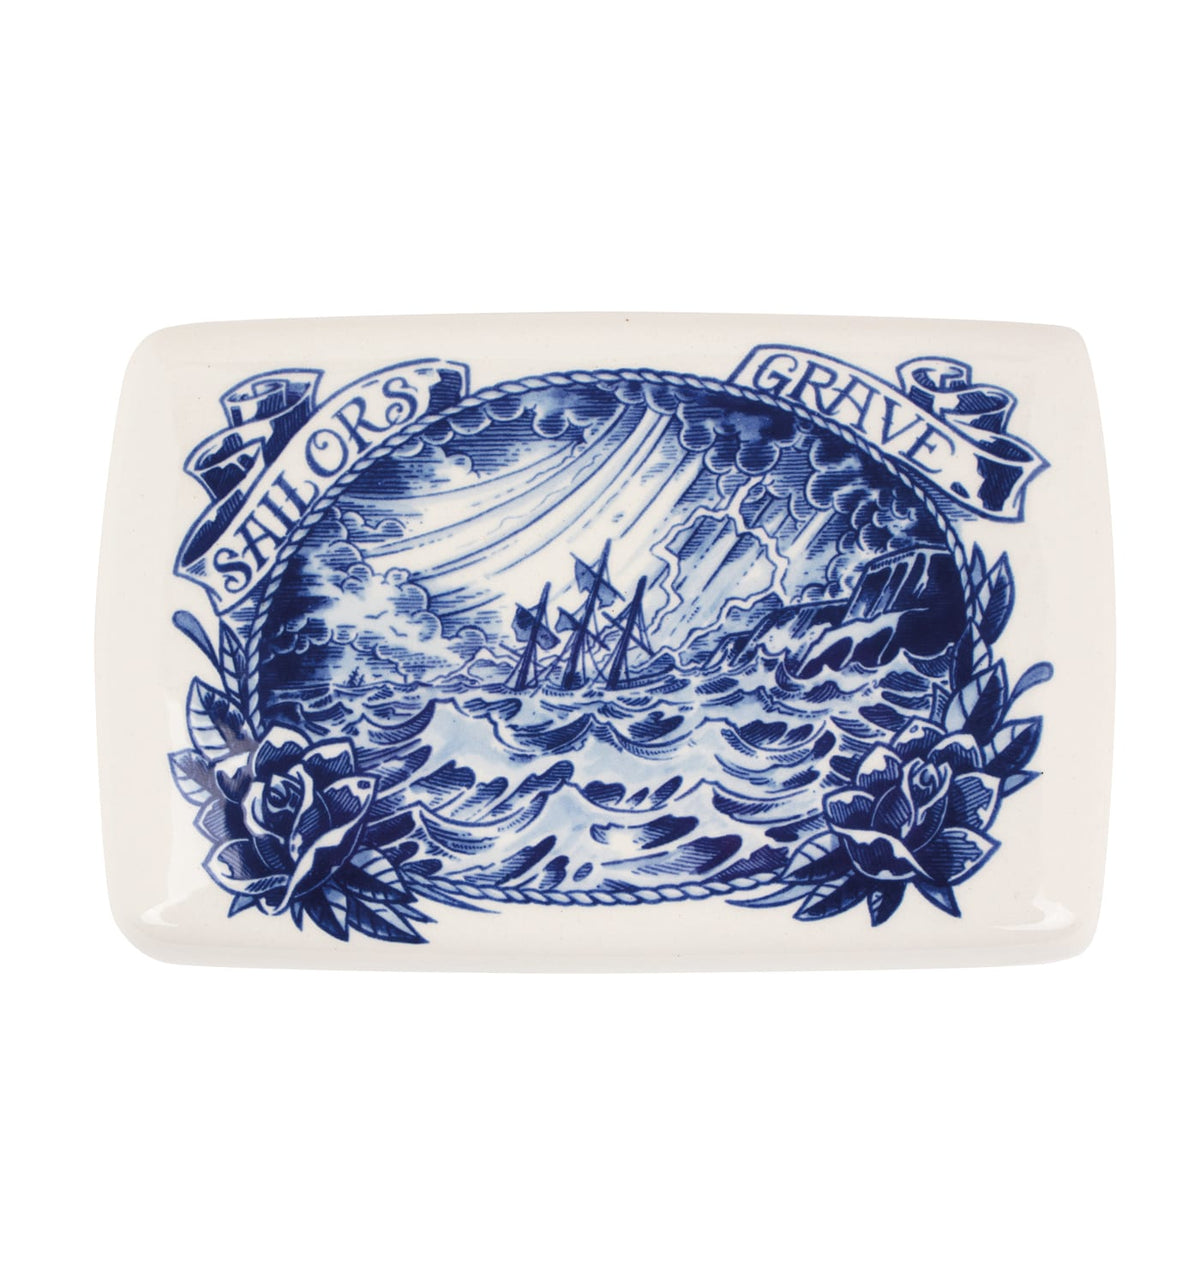 Sailor's Grave Table Box - Schiffmacher Royal Blue Tattoo by Royal Delft